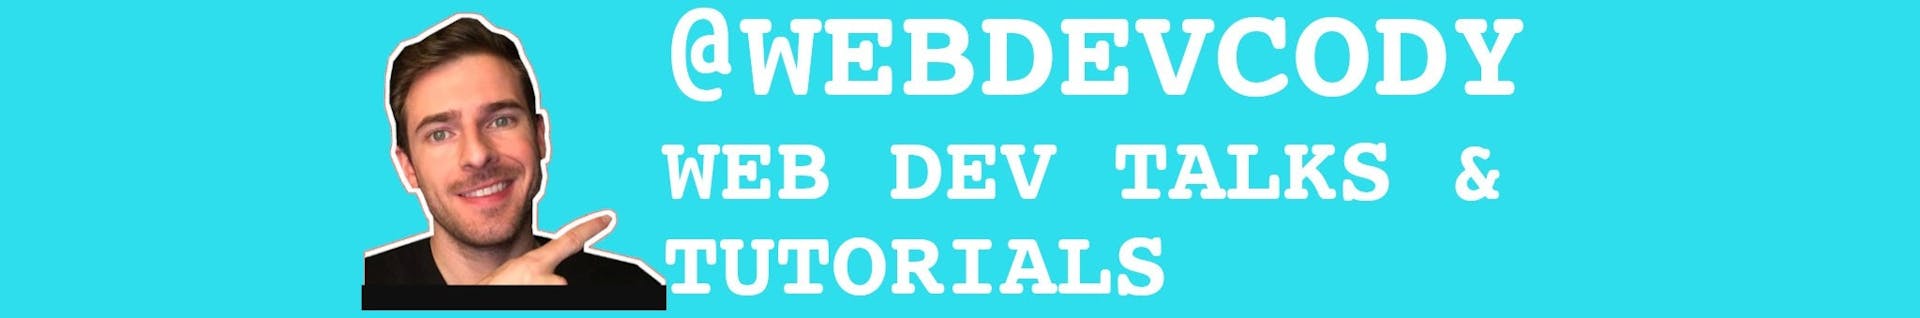 Web Dev Cody YouTube channel cover image